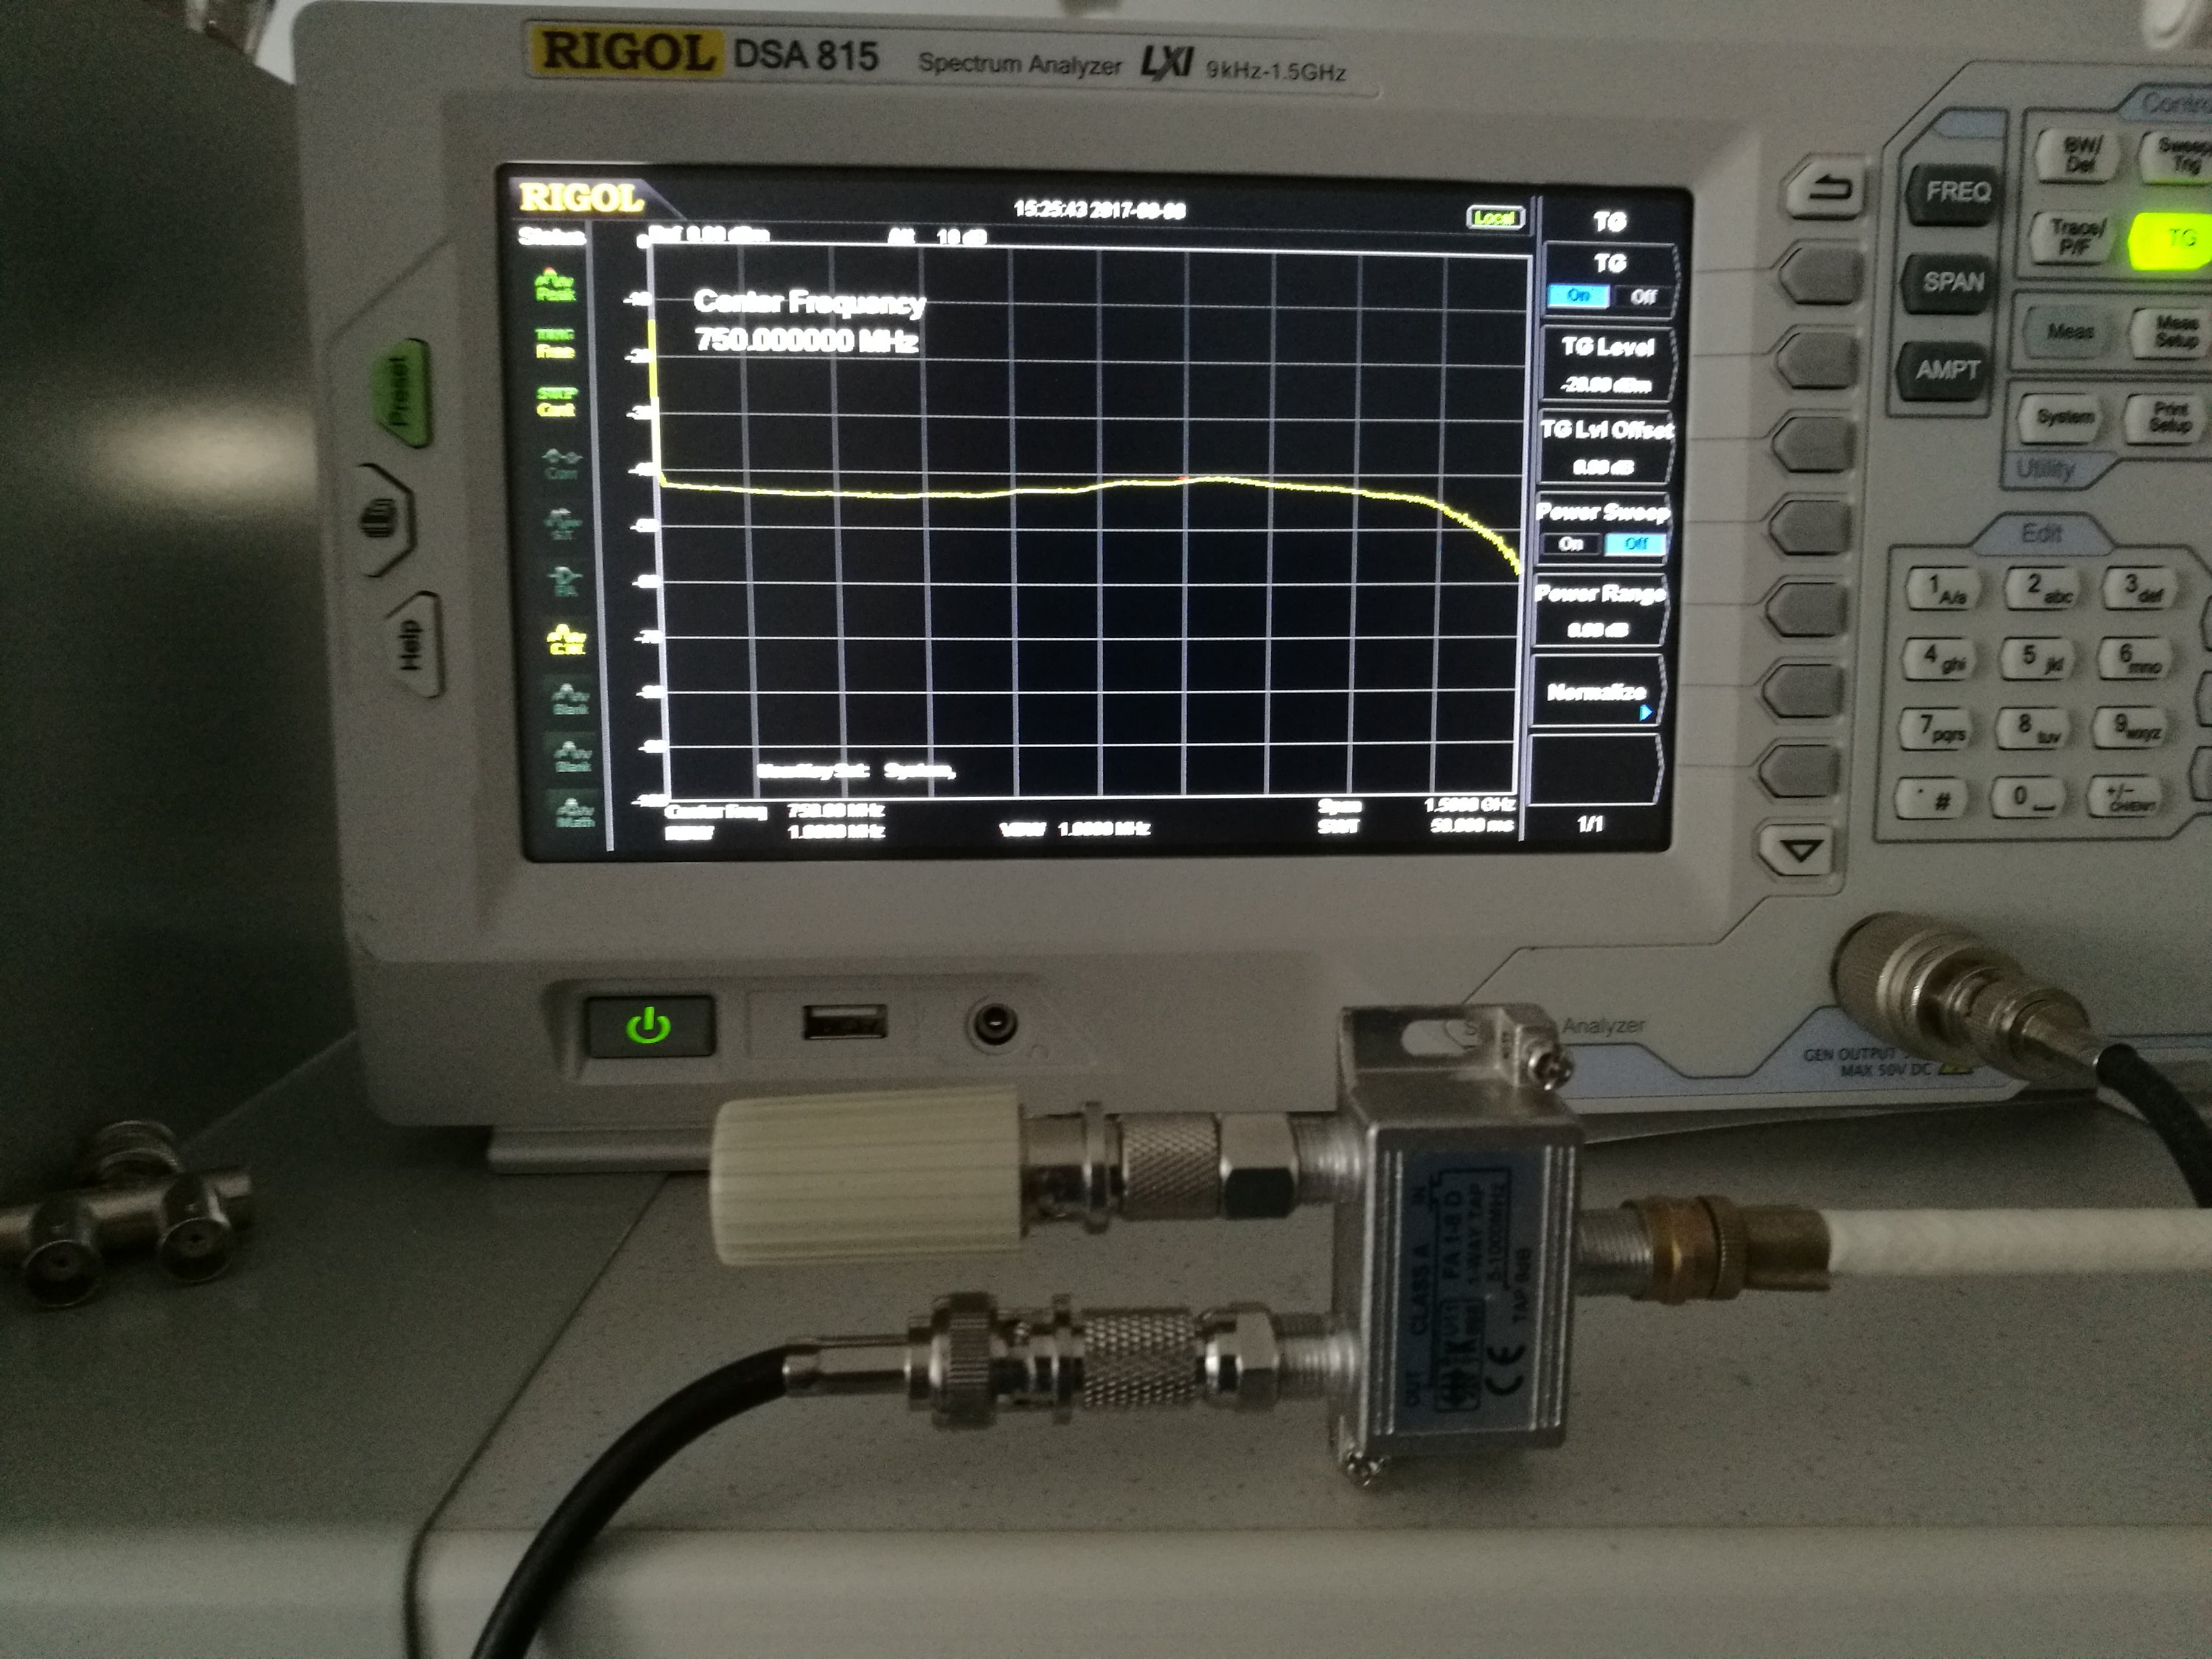 The measurements scenario with the RTL-SDR dongles, antennas and a PC.